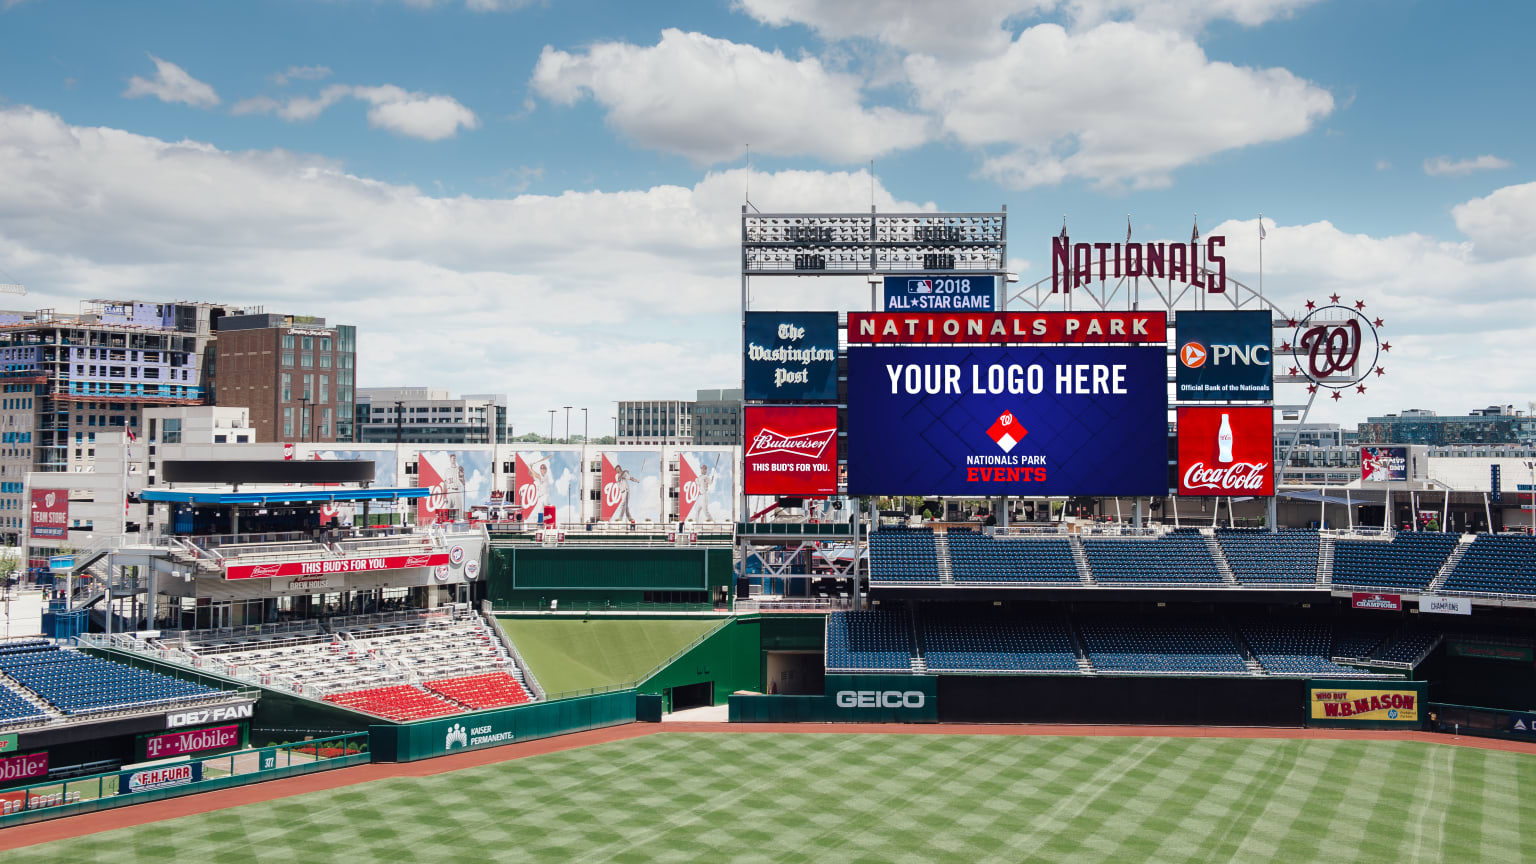 Are these the Nationals Park 2018 MLB All-Star Game batting